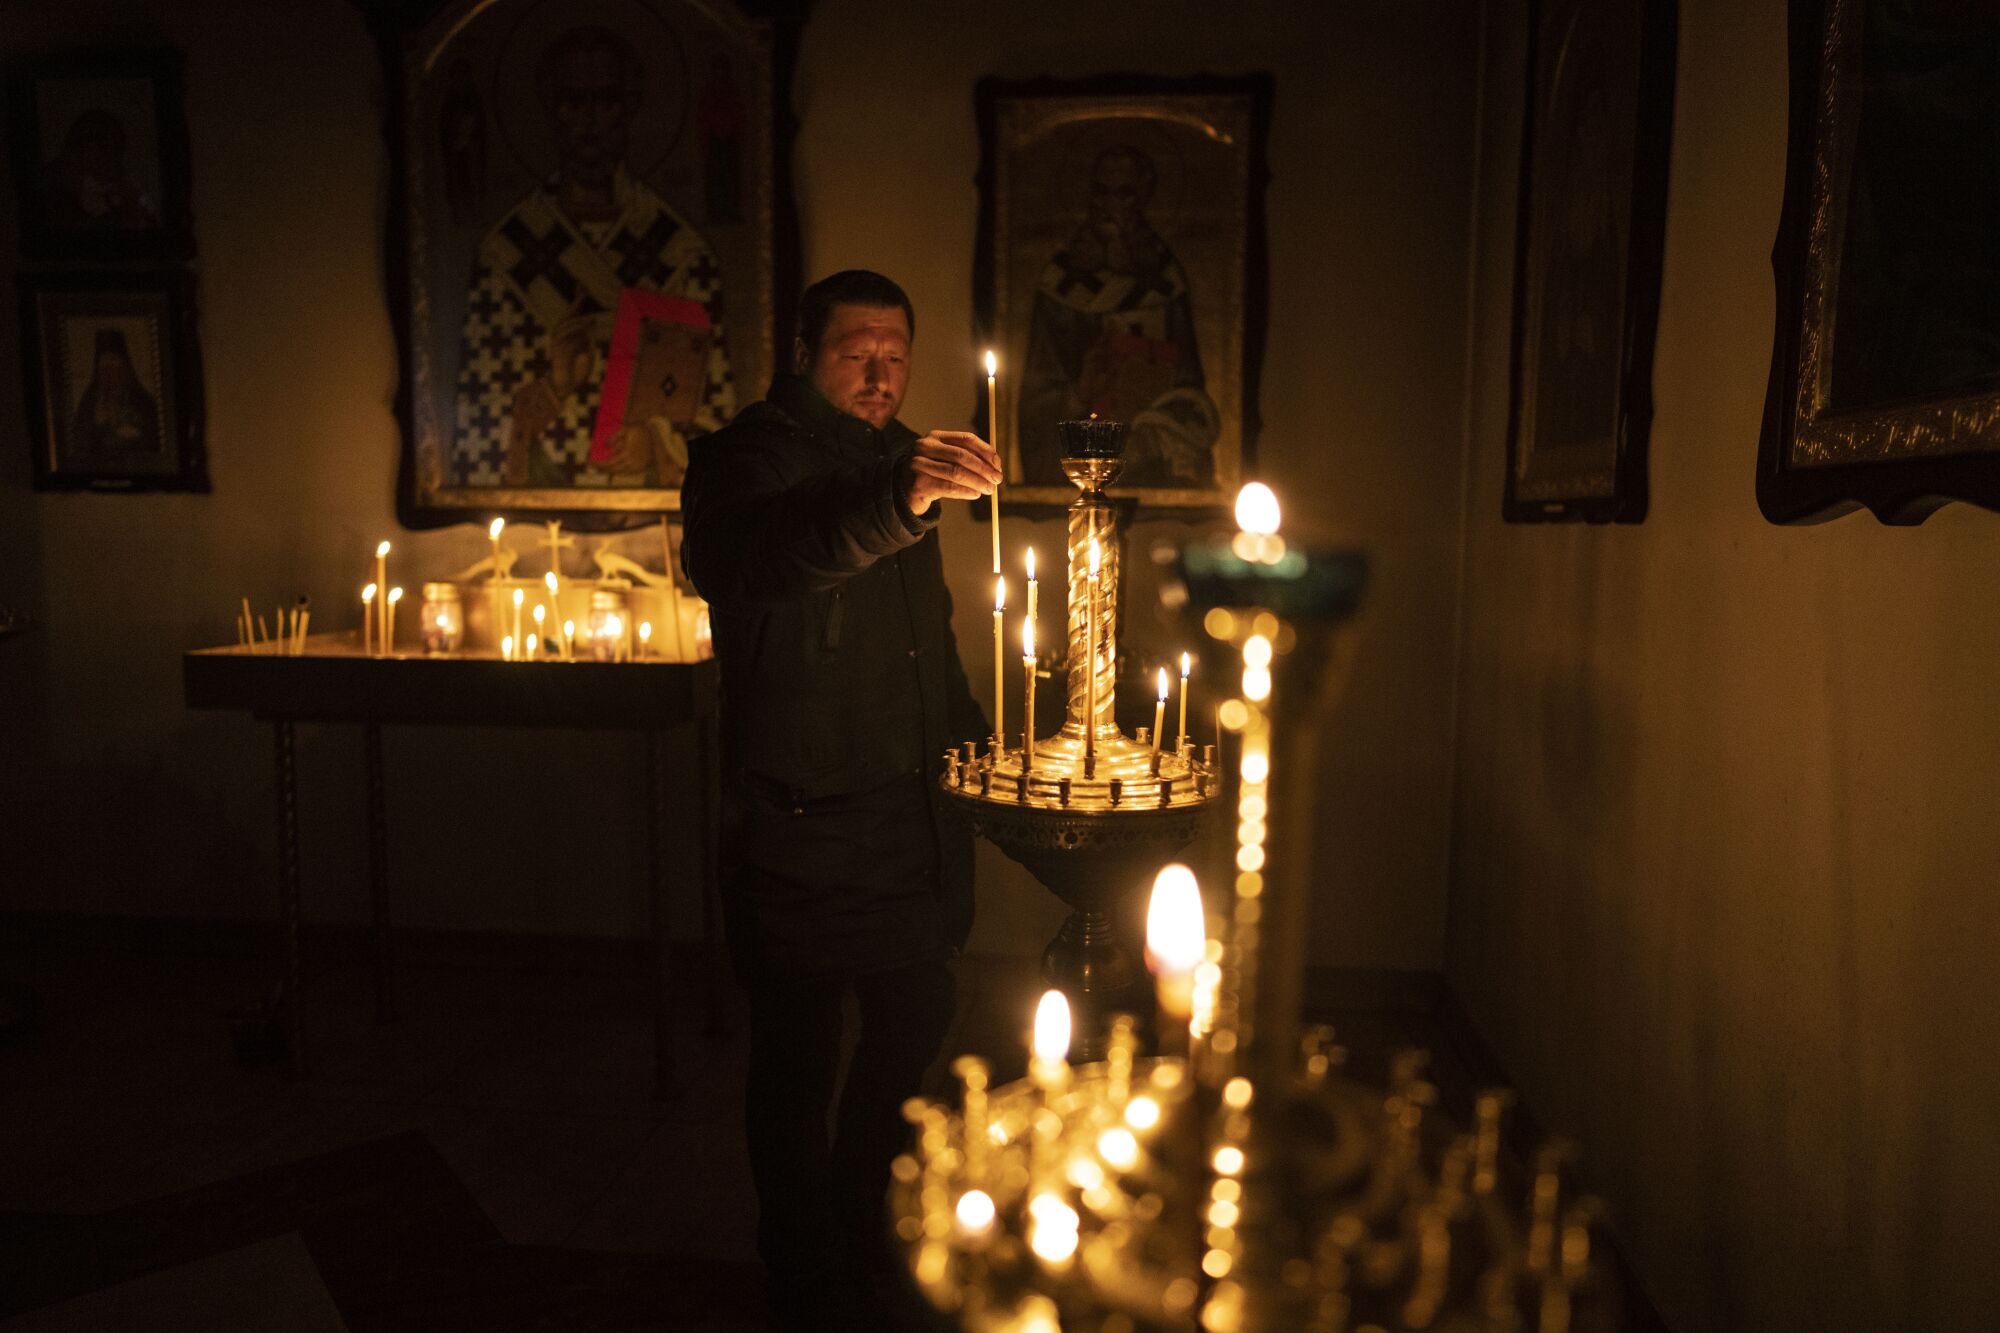 A man lights a candle in a church.